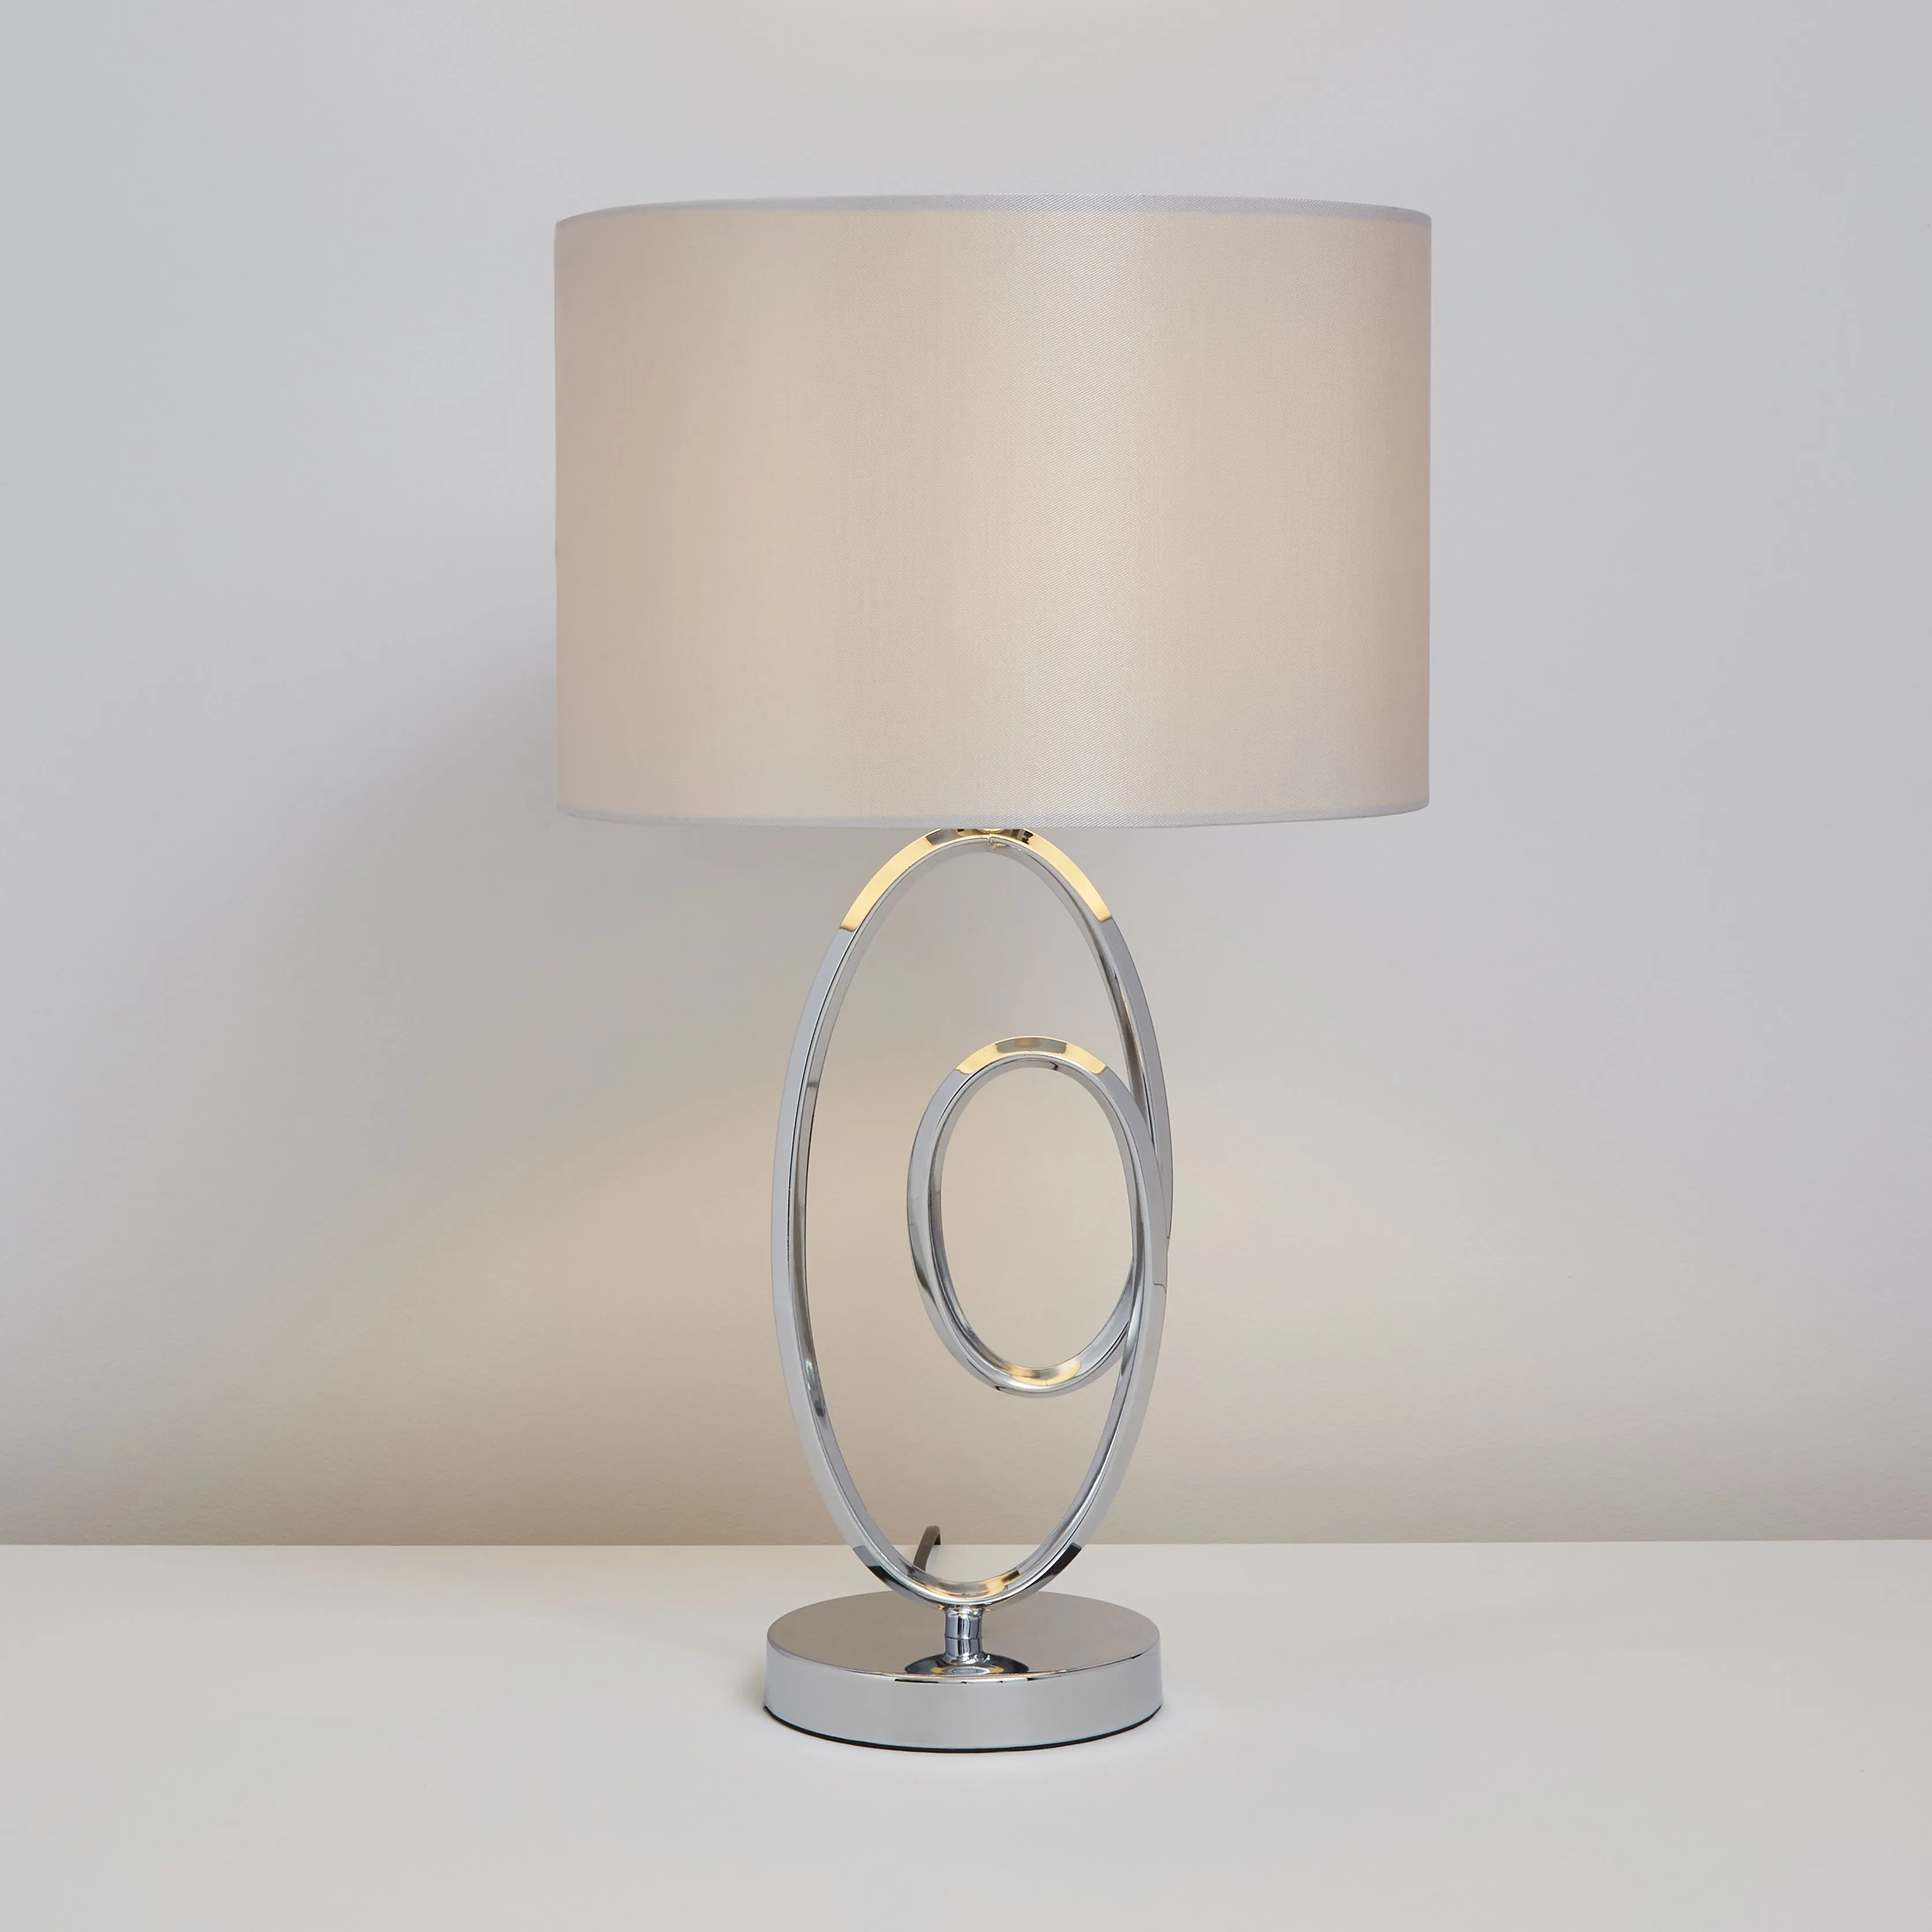 Inlight Hercule Spiral Polished Silver effect LED Table lamp